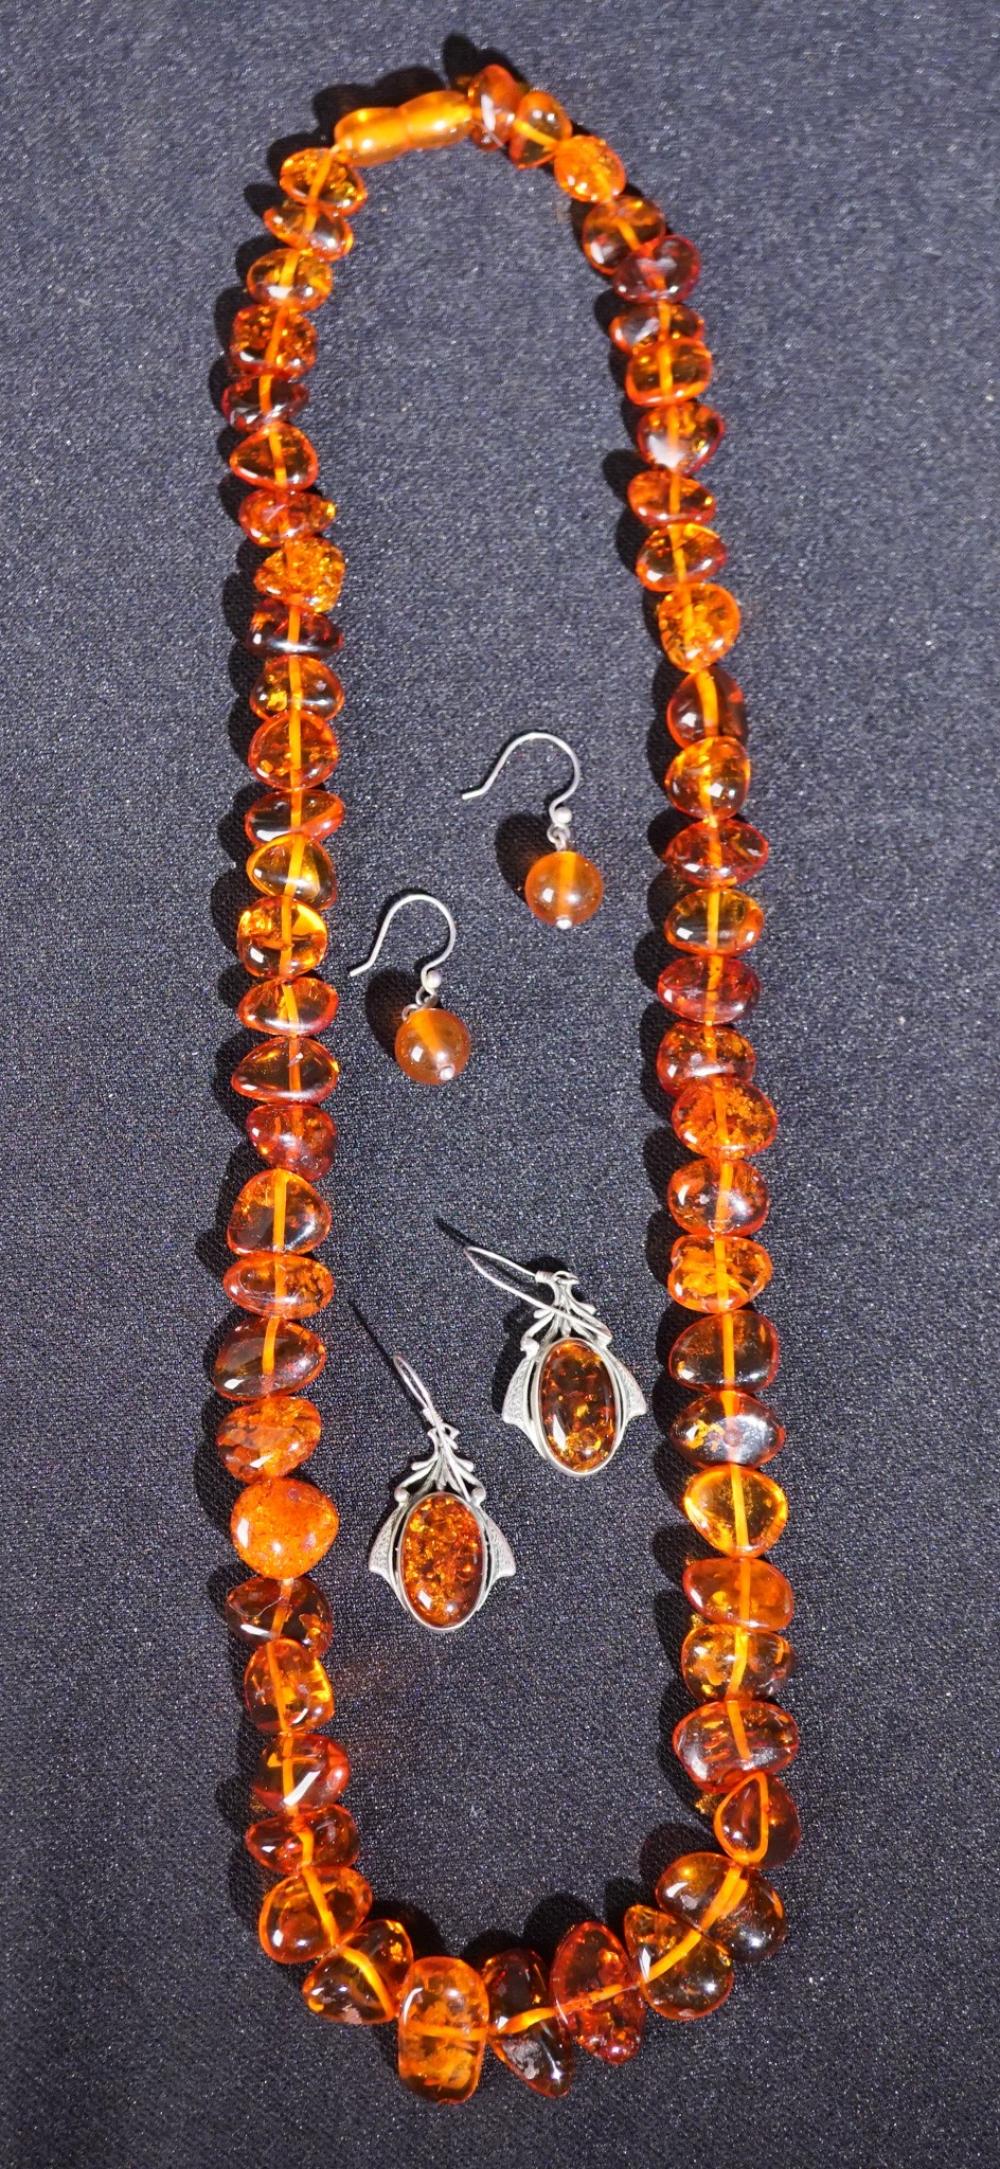 COLLECTION OF AMBER-TYPE JEWELRYCollection